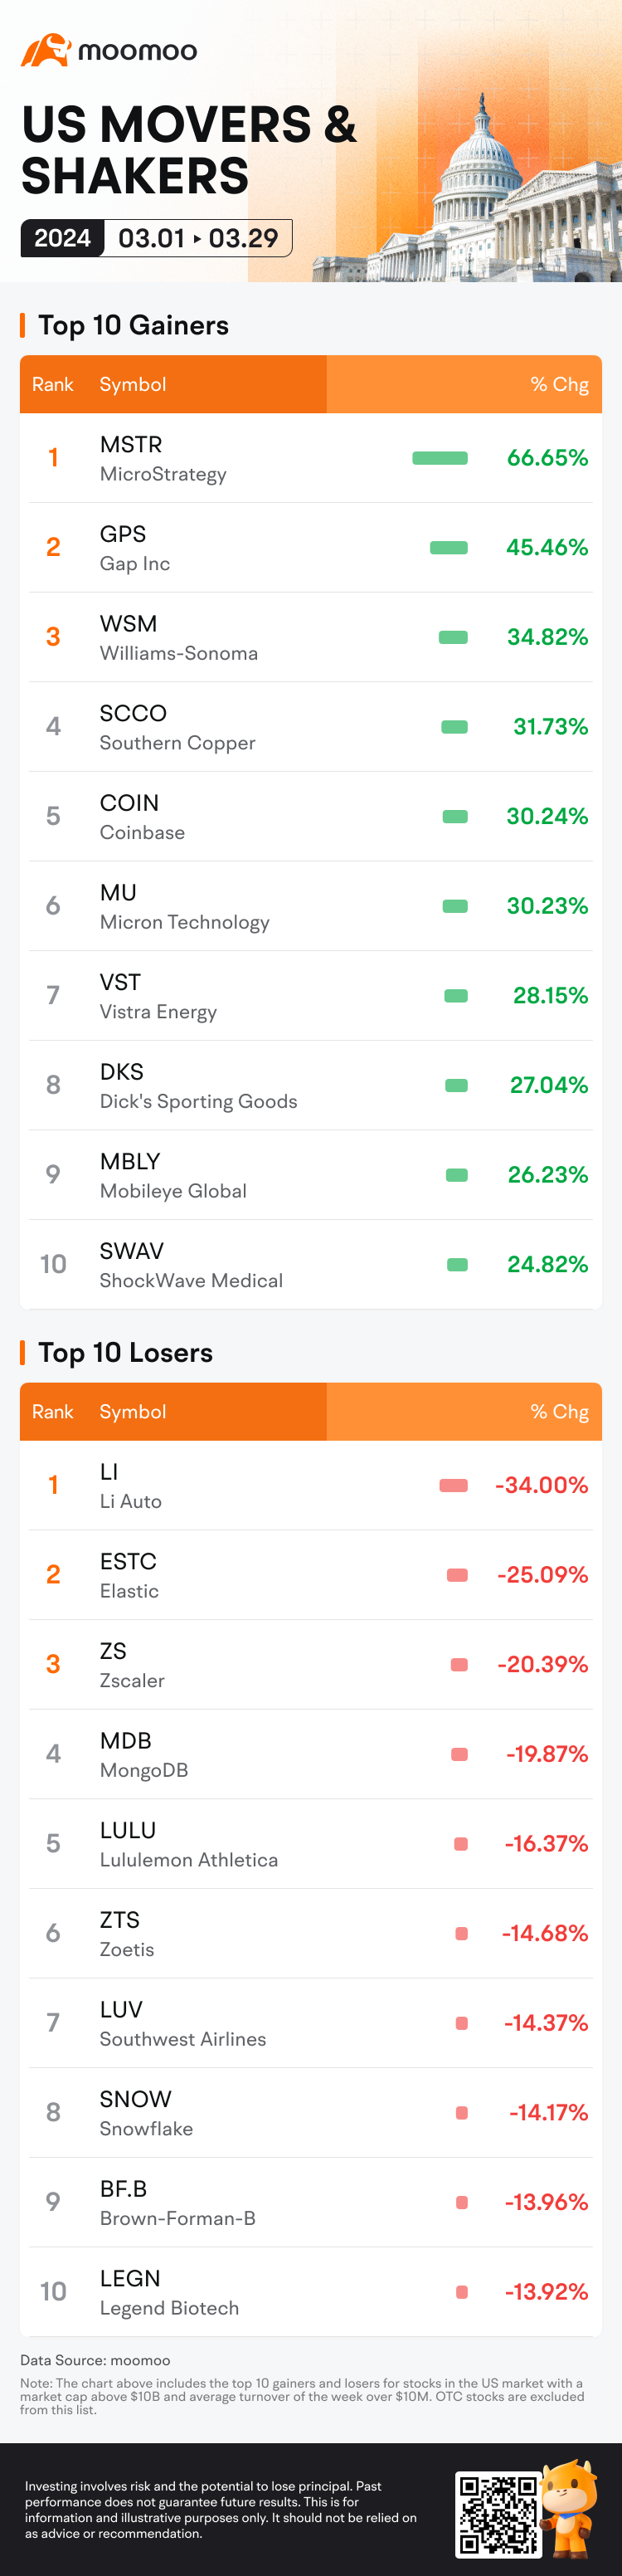 US Market Movers & Shakers in March: MSTR, GPS, WSM, SCCO and More